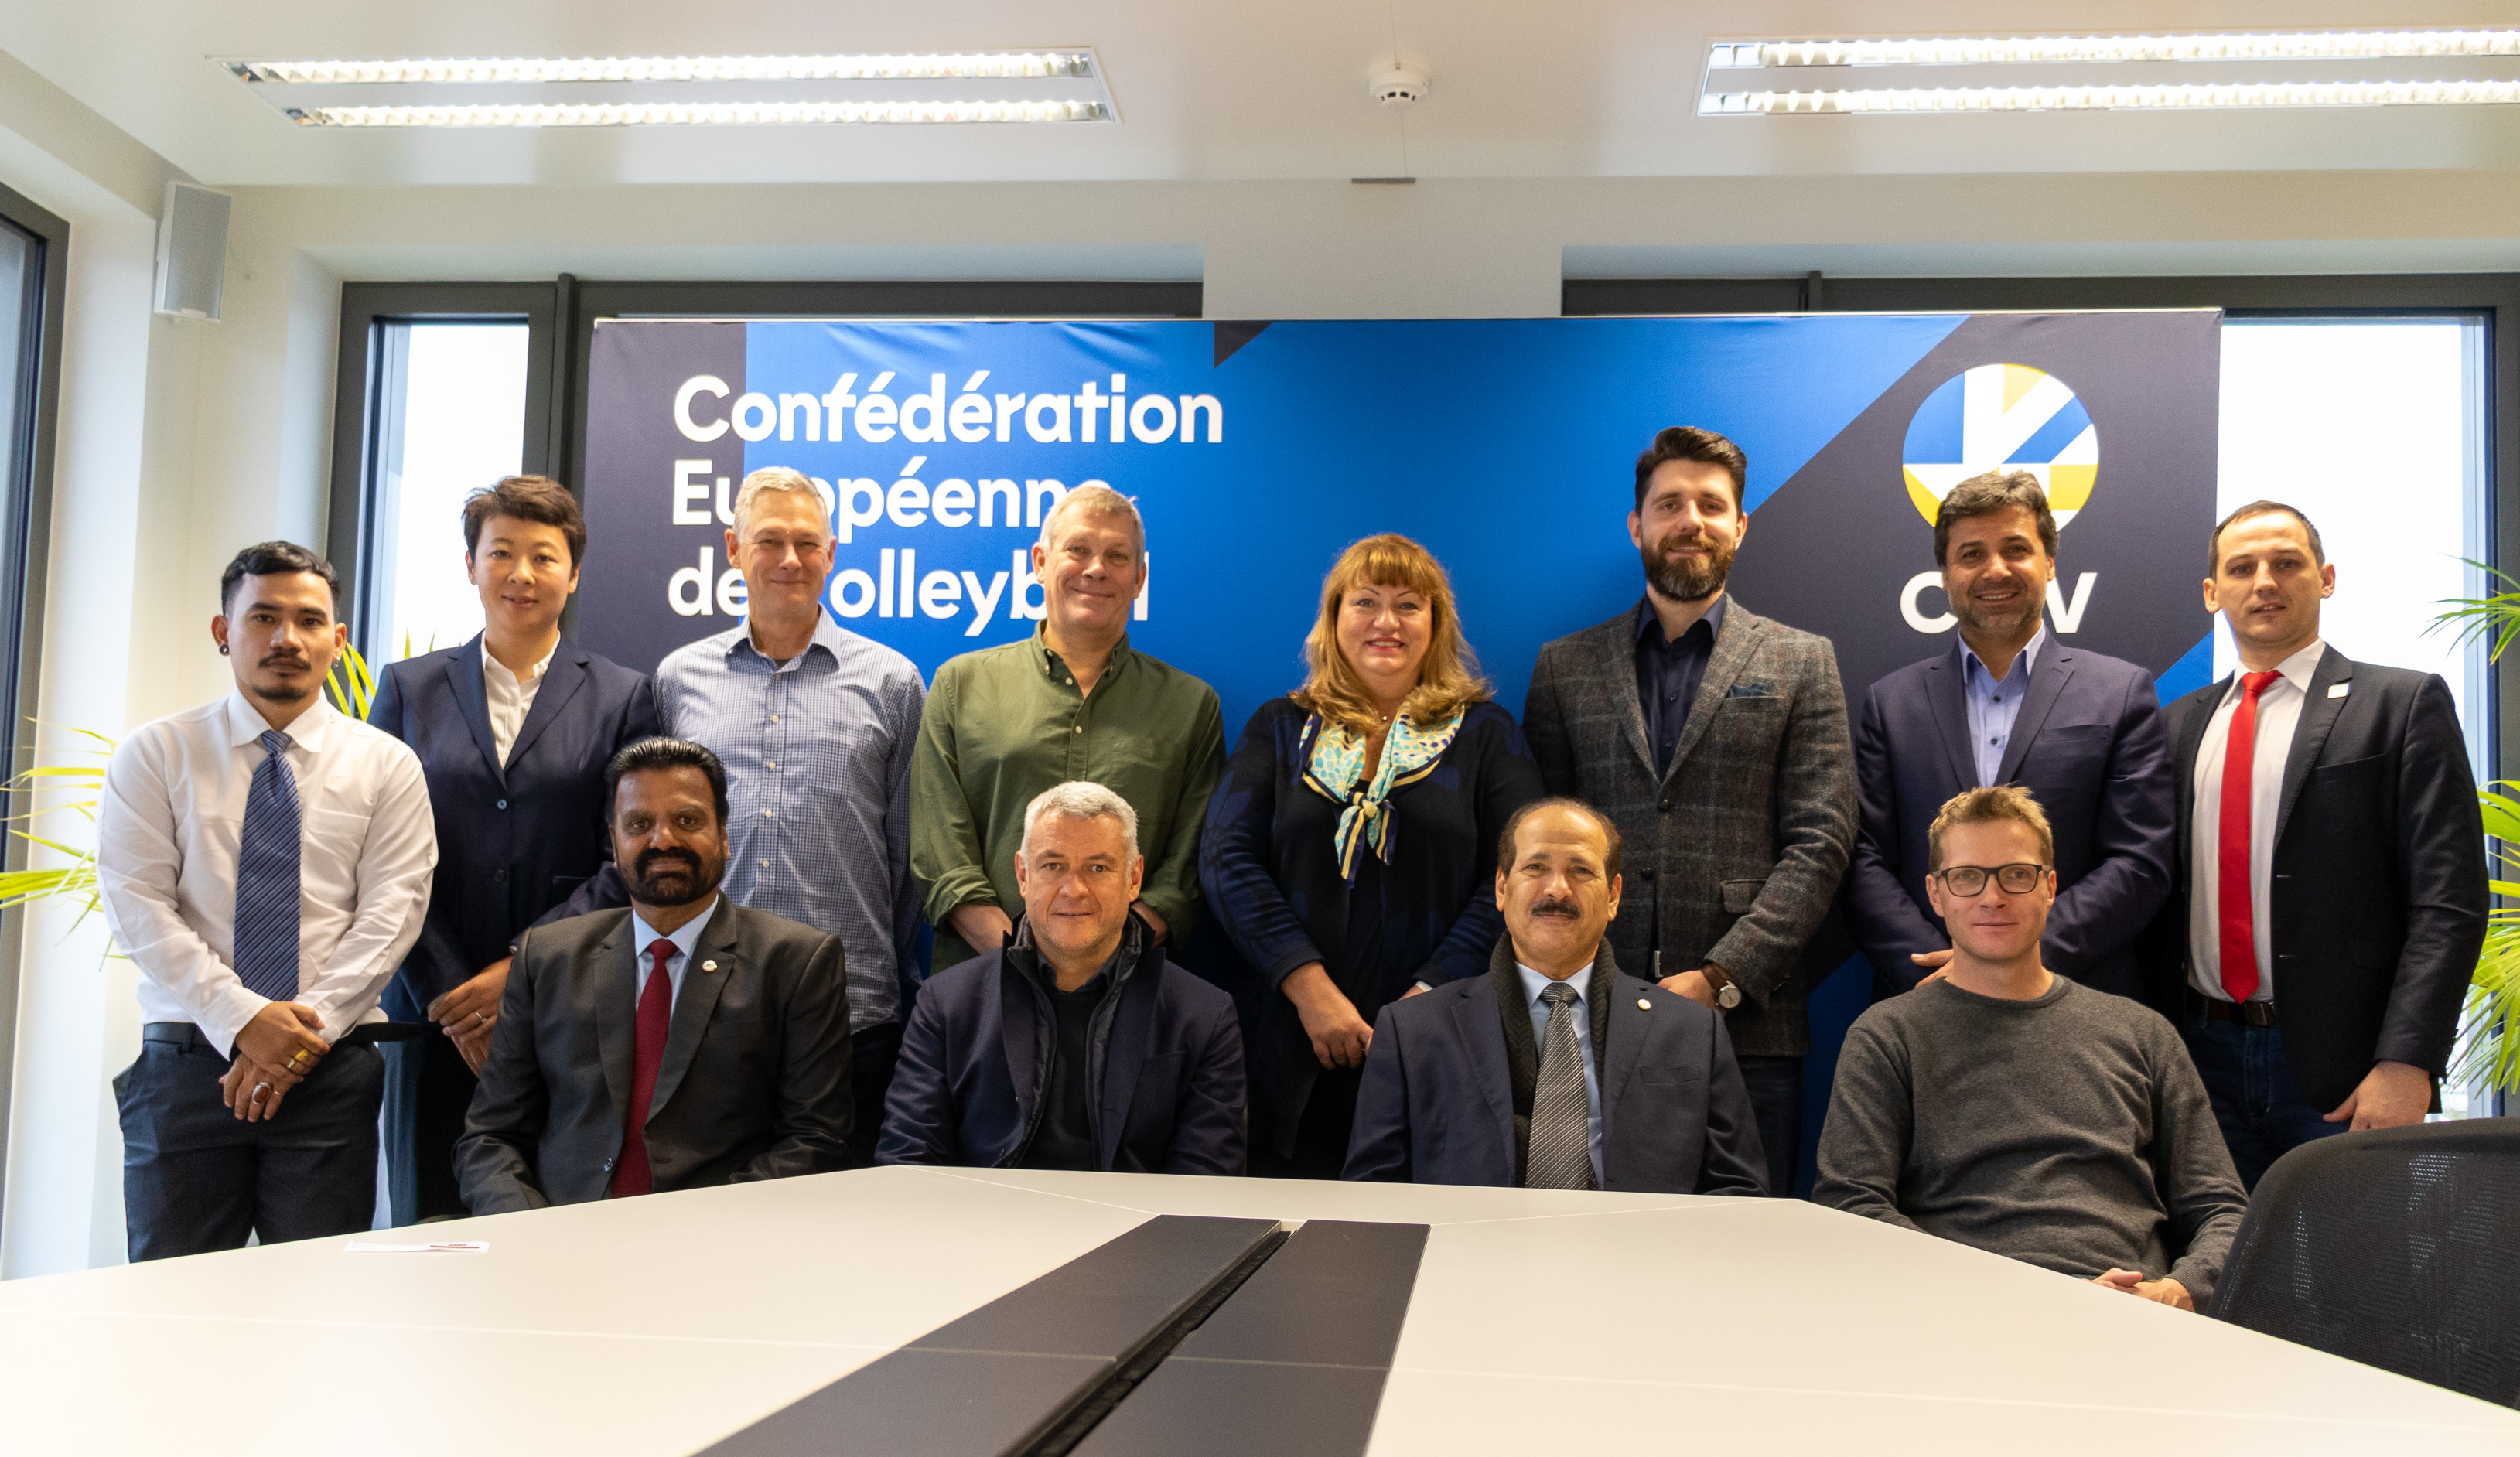 CEV AND AVC KICK-START JOINT WORK ON COACHES’ EDUCATION